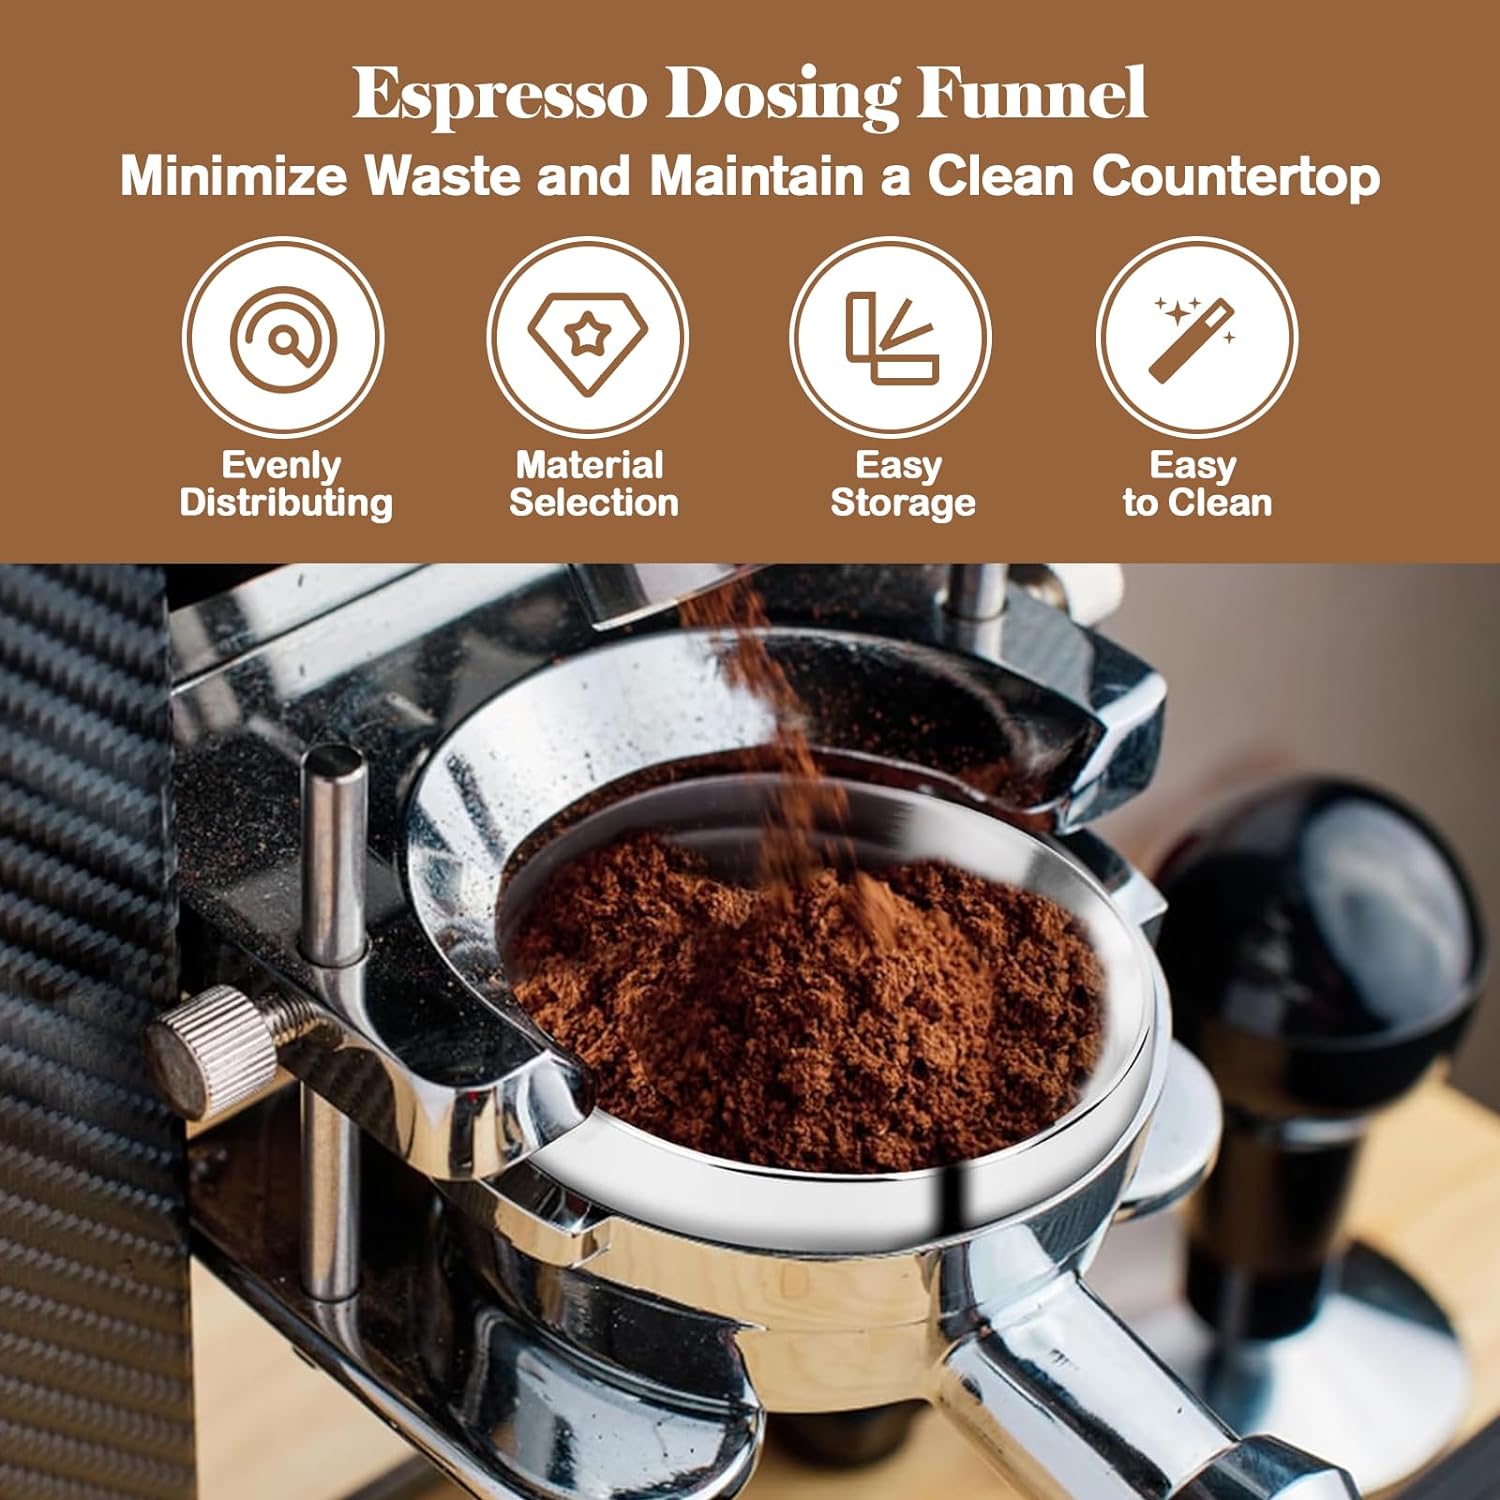 51mm Espresso Accessories Kit, WDT Tool, Dosing Funnel and Puck Screen Set, Coffee Needle Distribution Stirrer, Portafilter Dosing Ring for Barista 51 mm